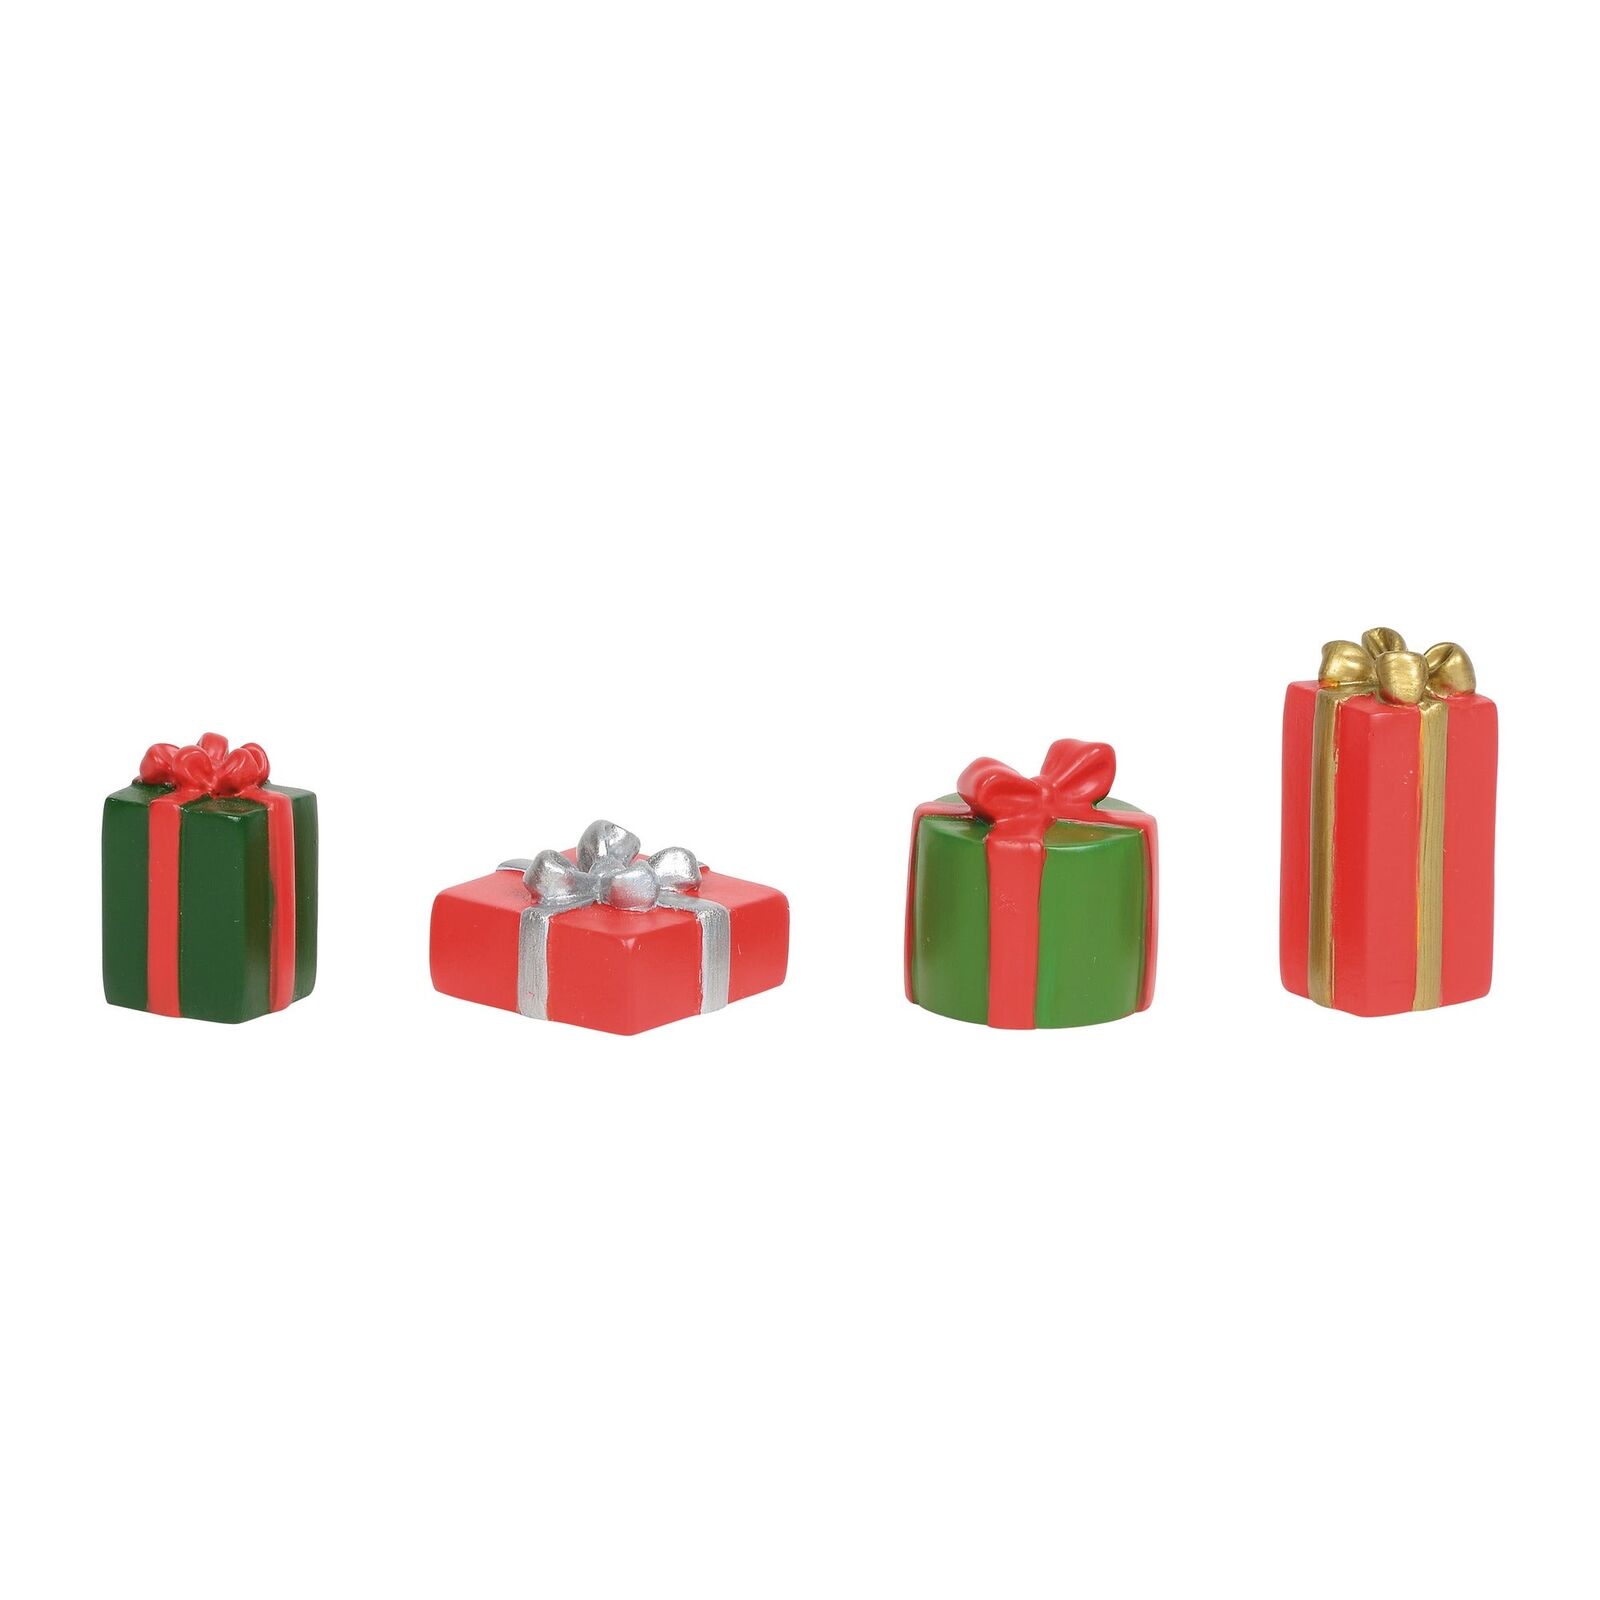 Department 56 Christmas Packages 6003182 Presents